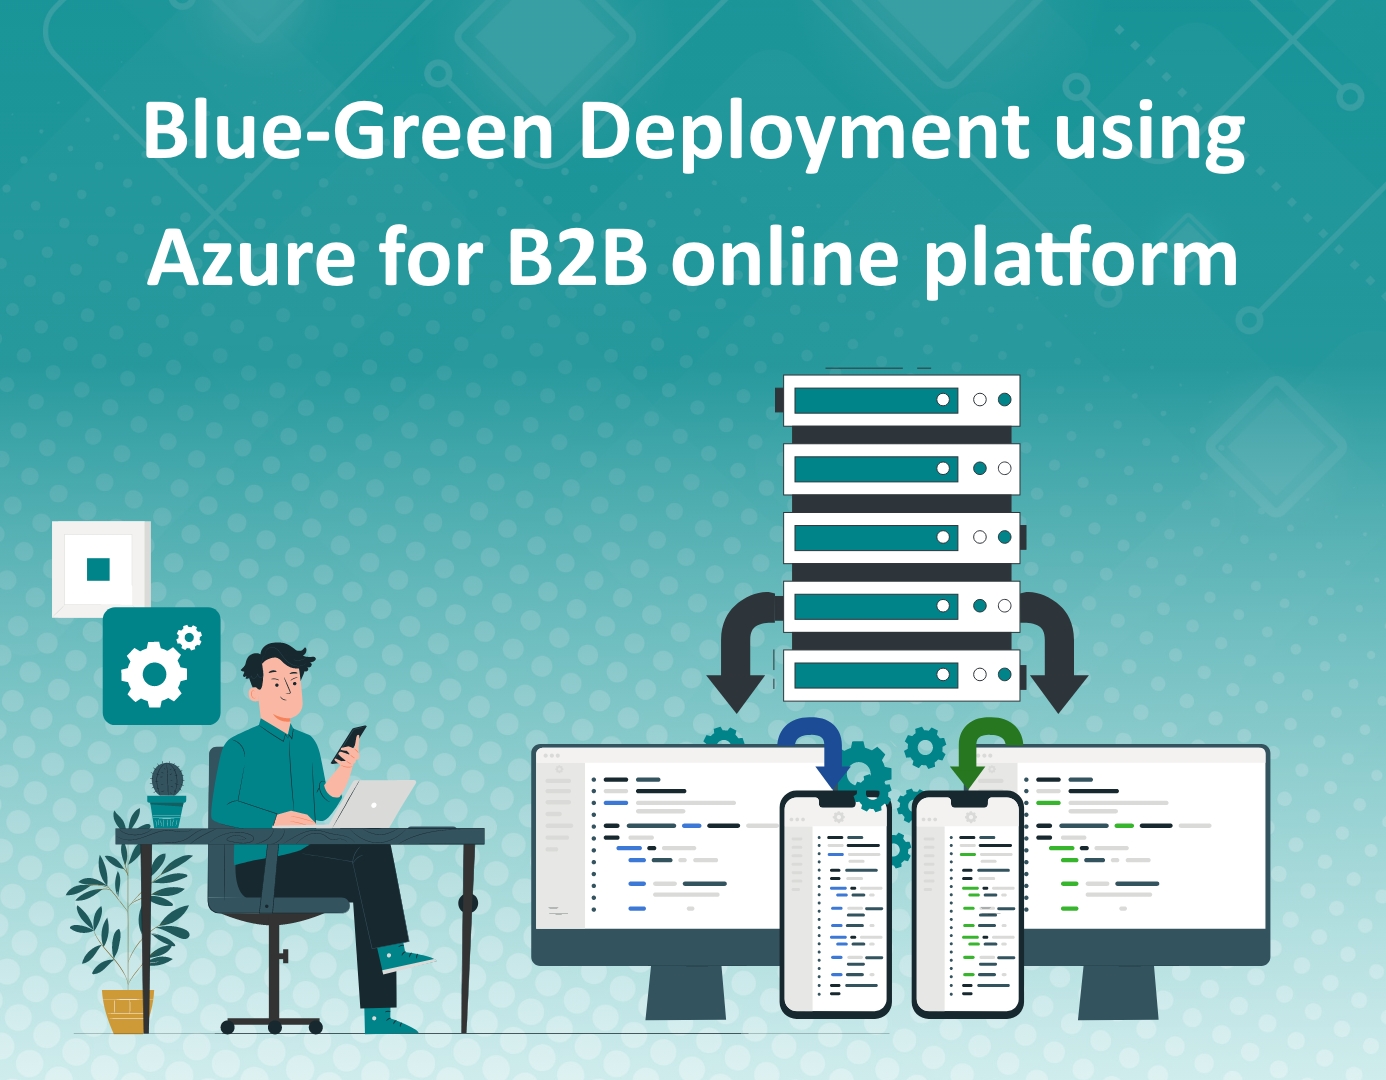 Illustration of Azure's blue-green deployment for B2B online platform, showcasing seamless deployment process and improved reliability